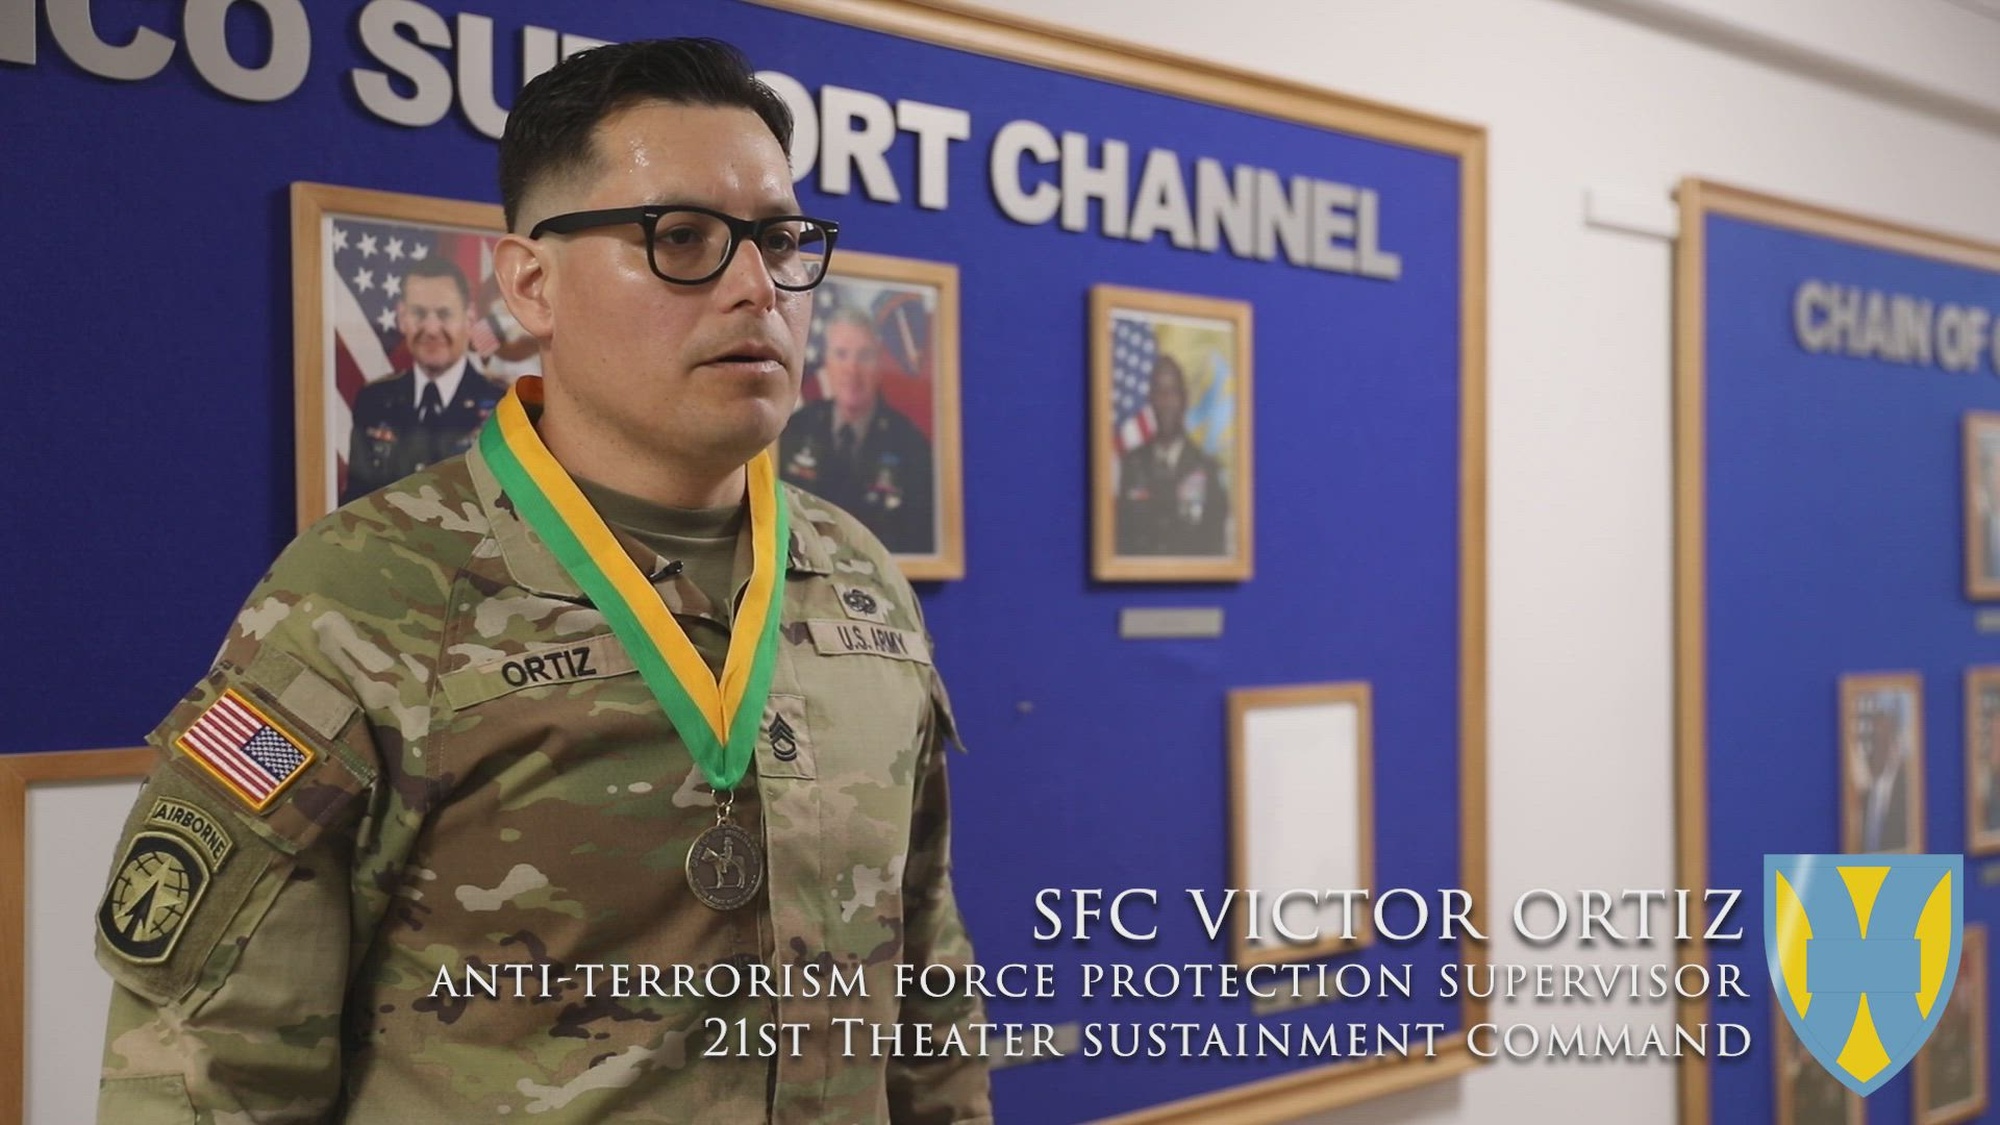 U.S. Army Sgt. 1st Class Victor Ortiz, anti-terrorism force protection supervisor, 21st Theater Sustainment Command, tells us what it means to him to be inducted into the Order of the Marechaussee.